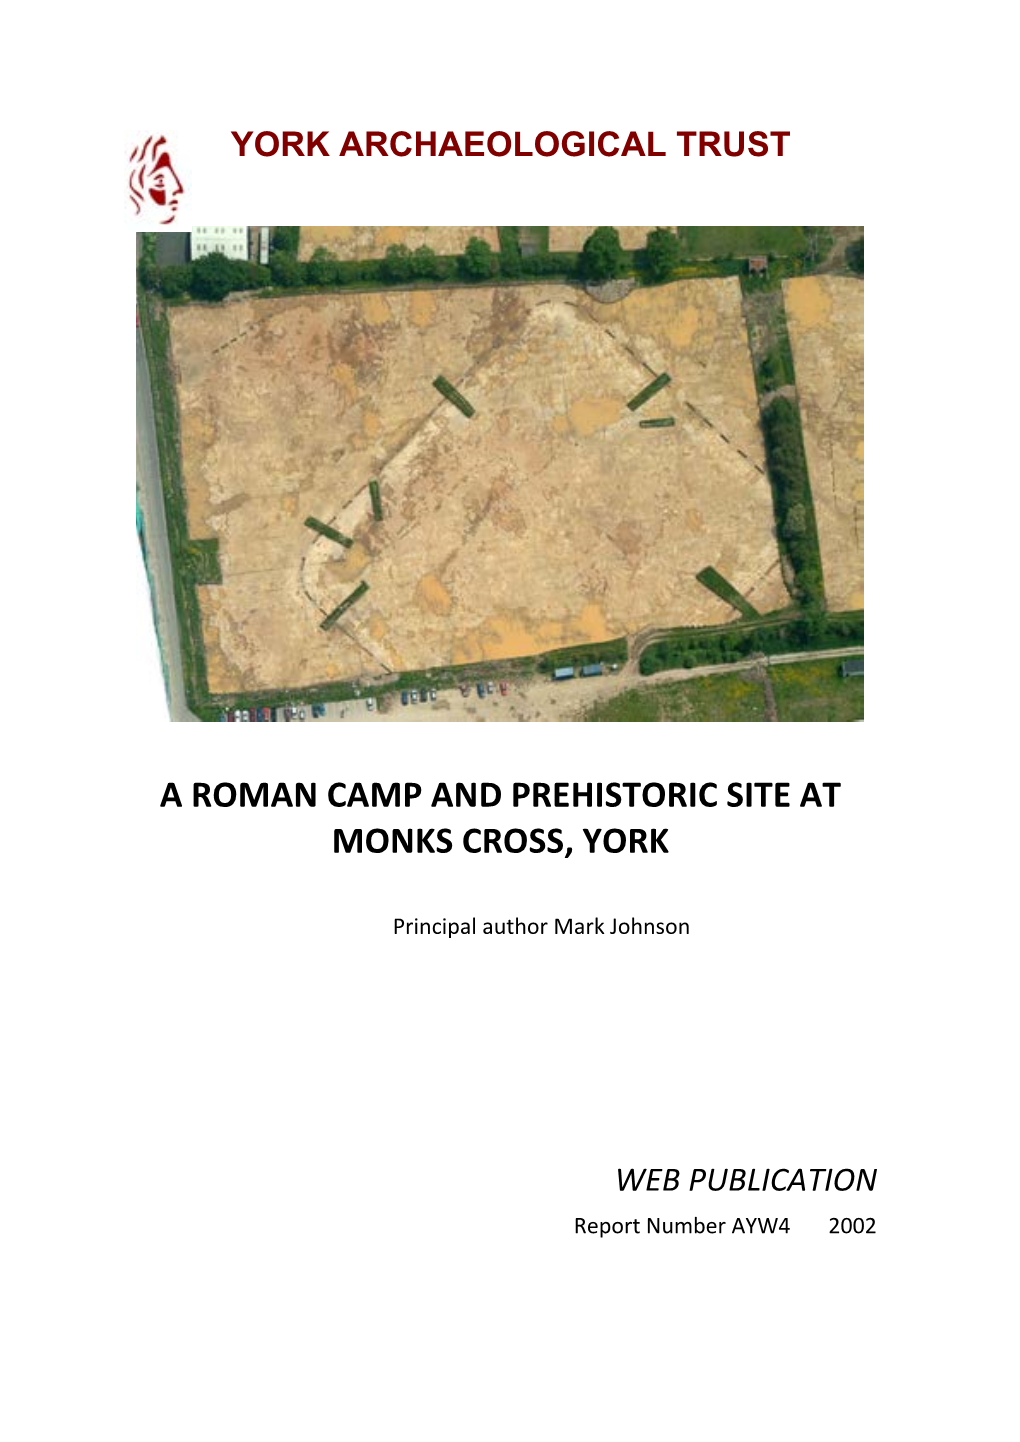 A Roman Camp and Prehistoric Site at Monks Cross, York